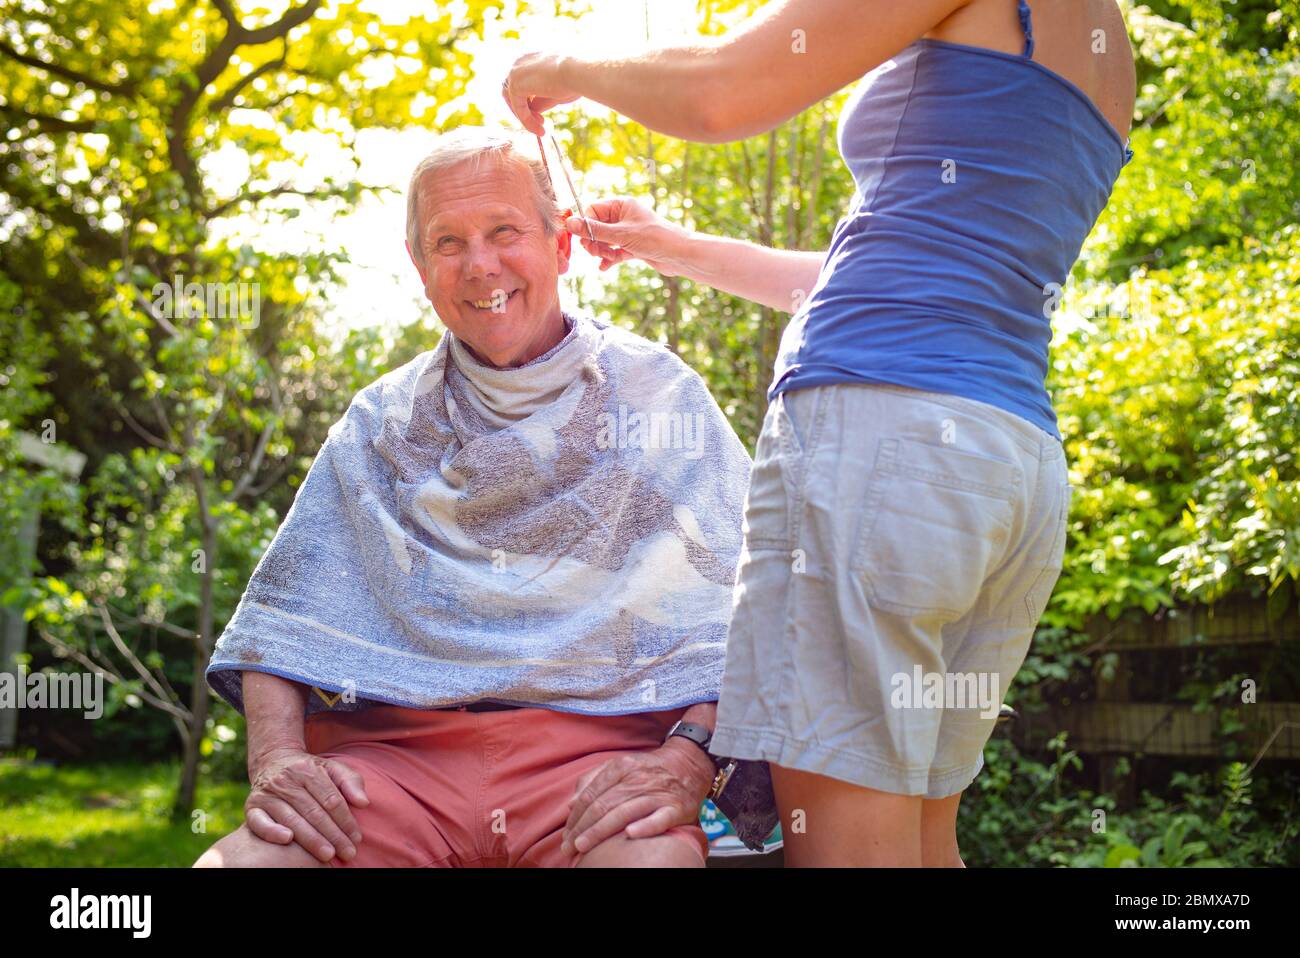 isolating Daughter in-law gives a haircut to her father in-law during lockdown in the garden during the coronavirus pandemic. Stock Photo